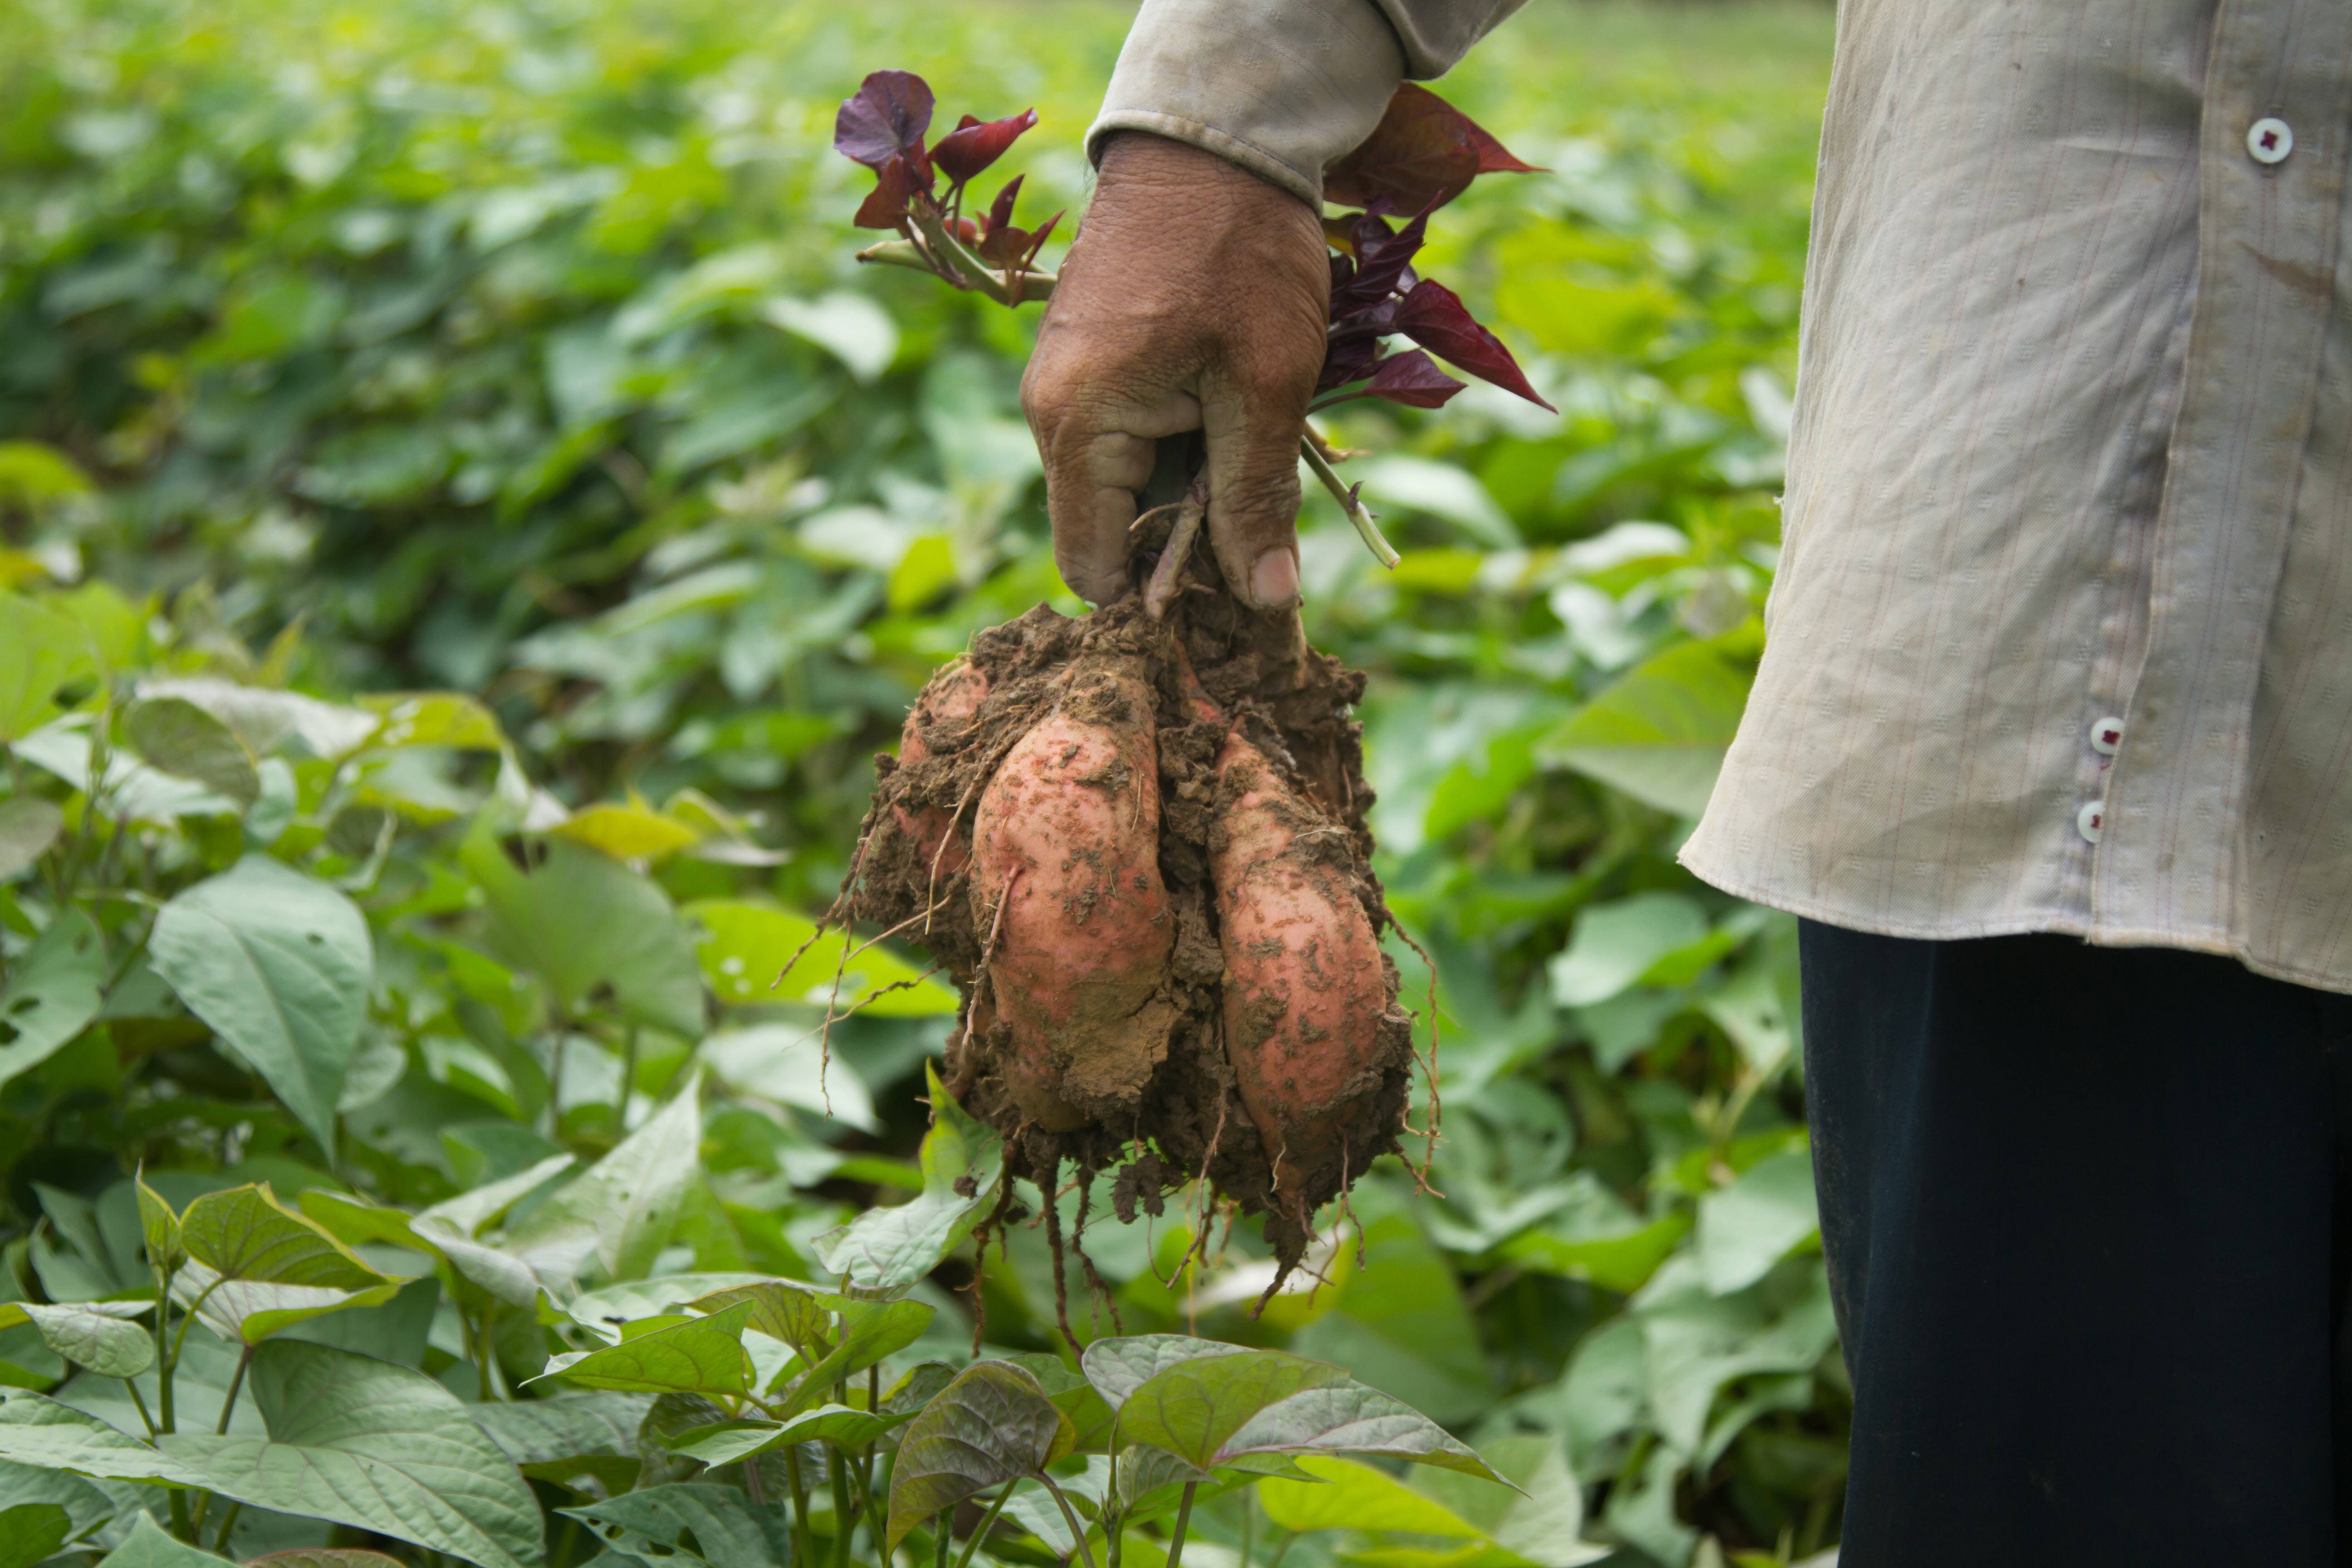 A person holding sweet potatoes